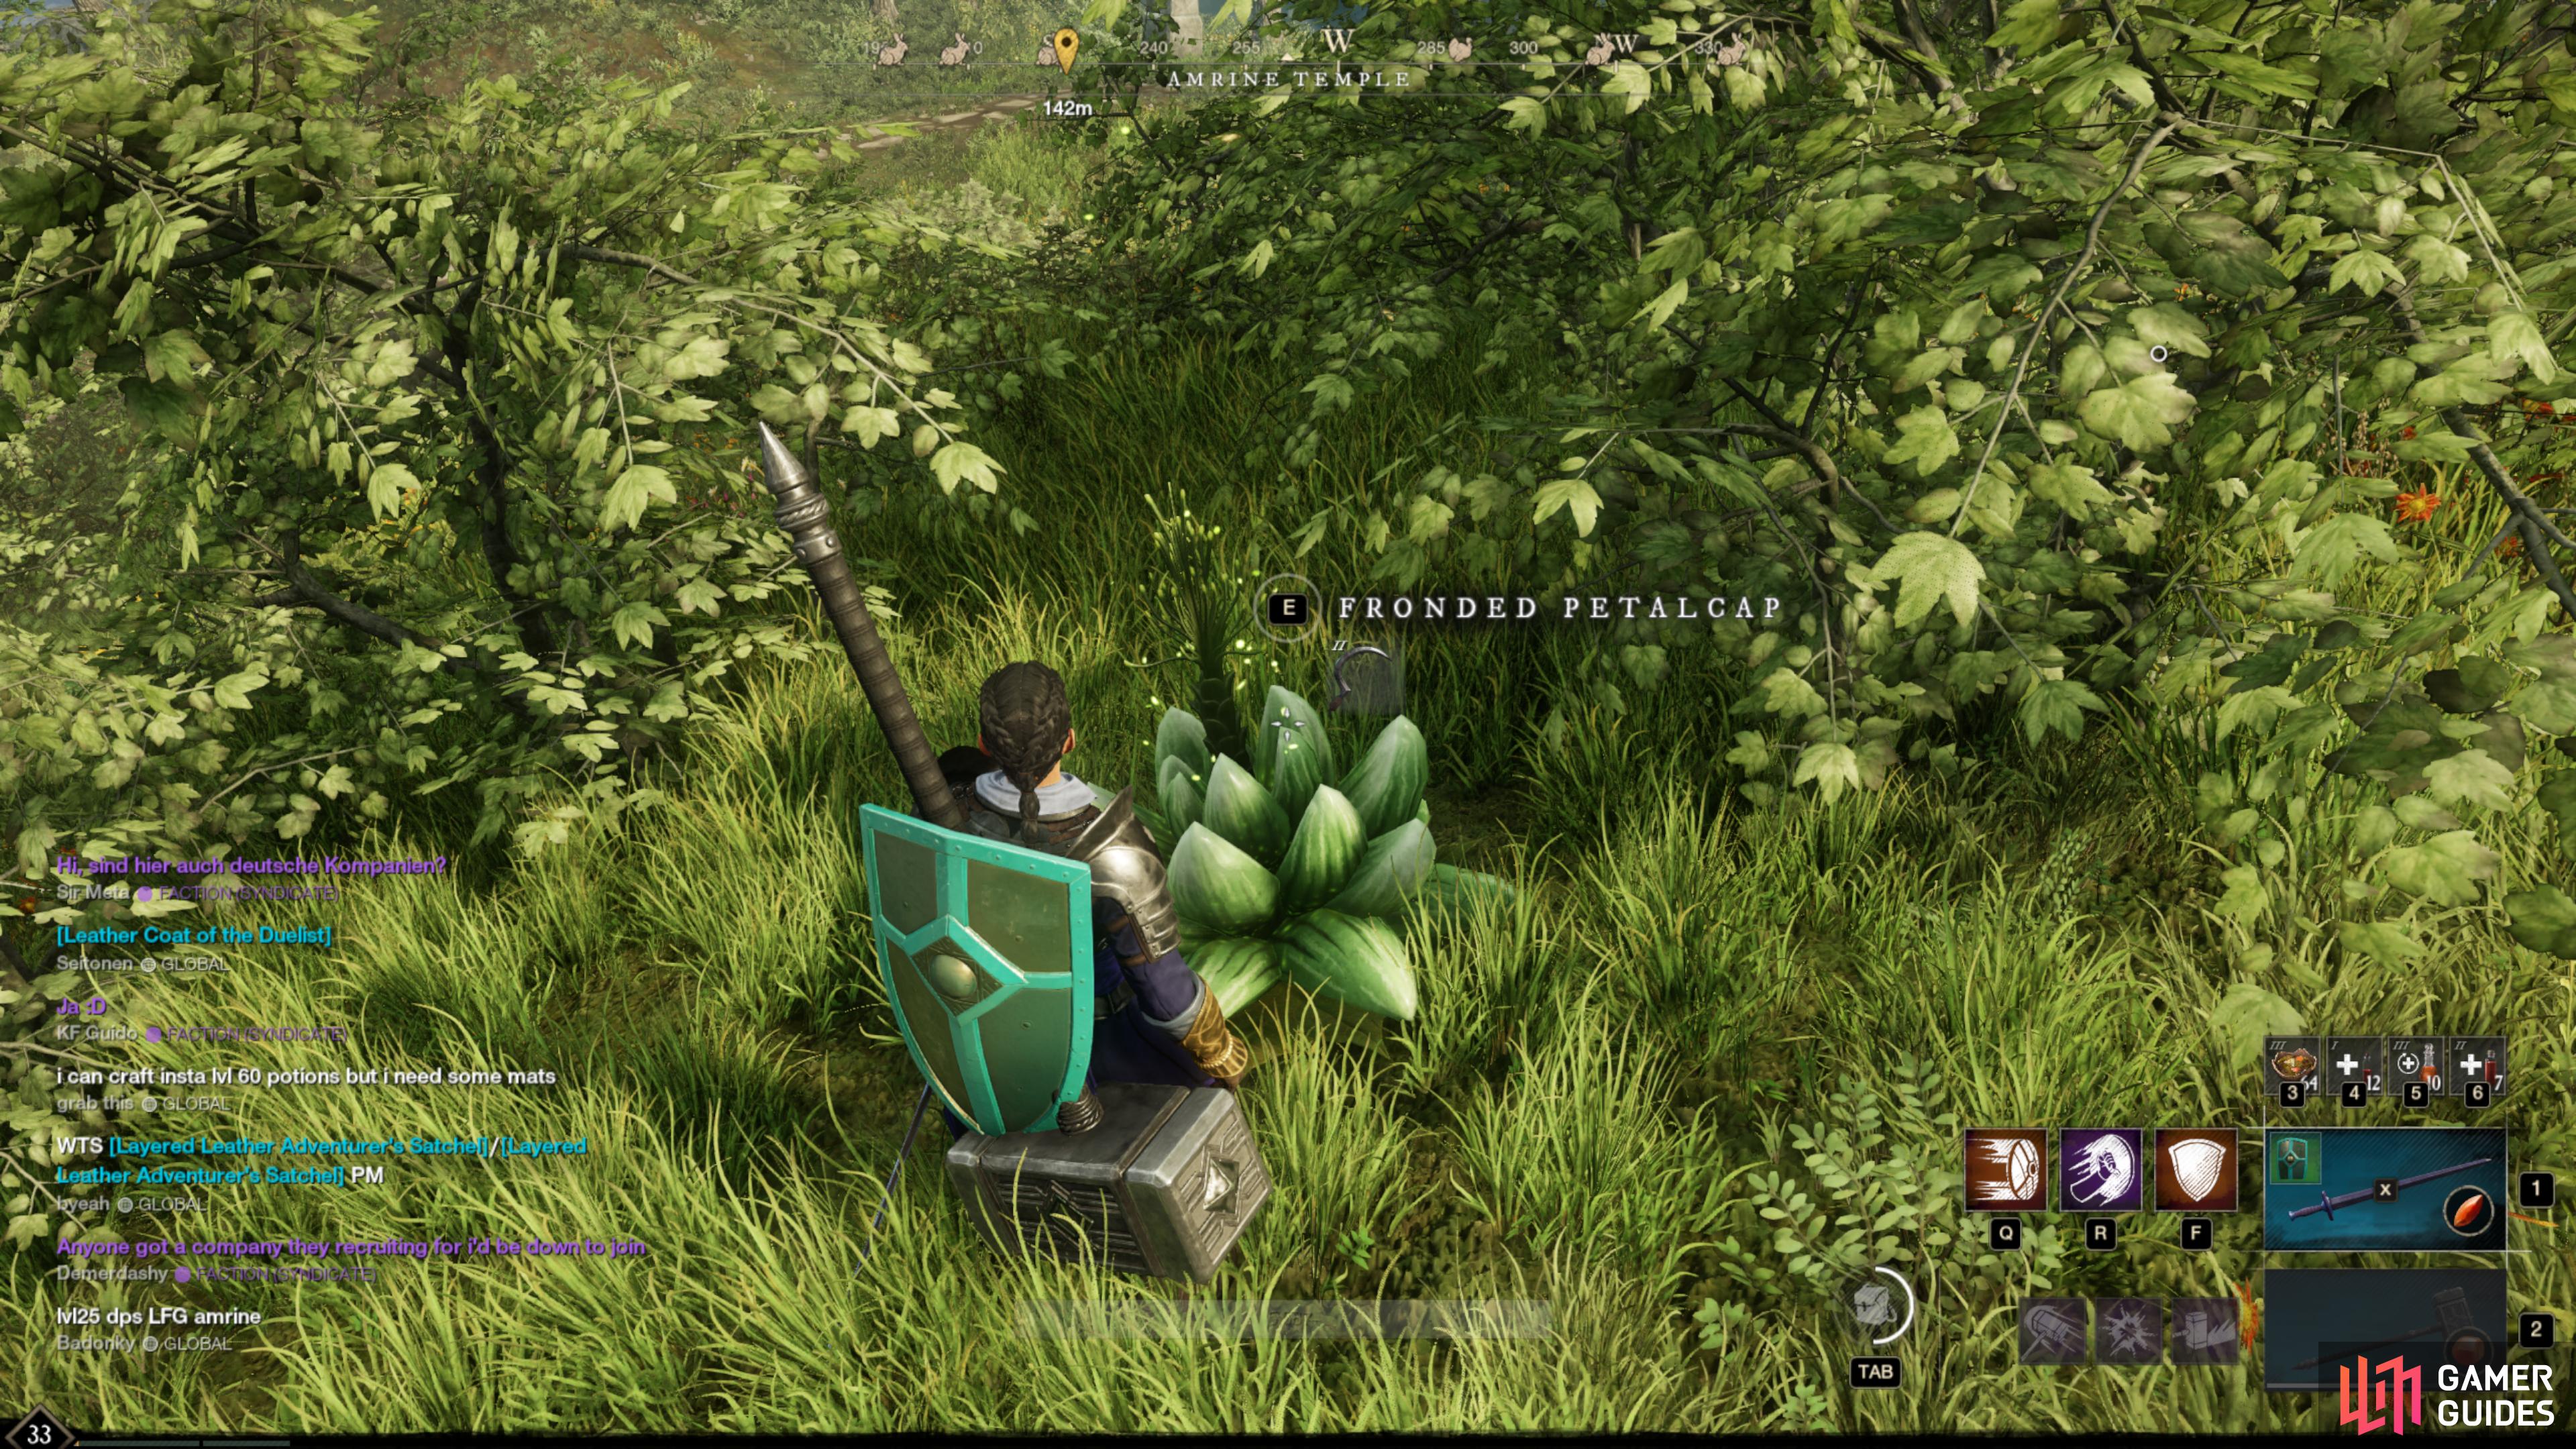 Fronded Petalcaps are a Harvesting resource in New World.